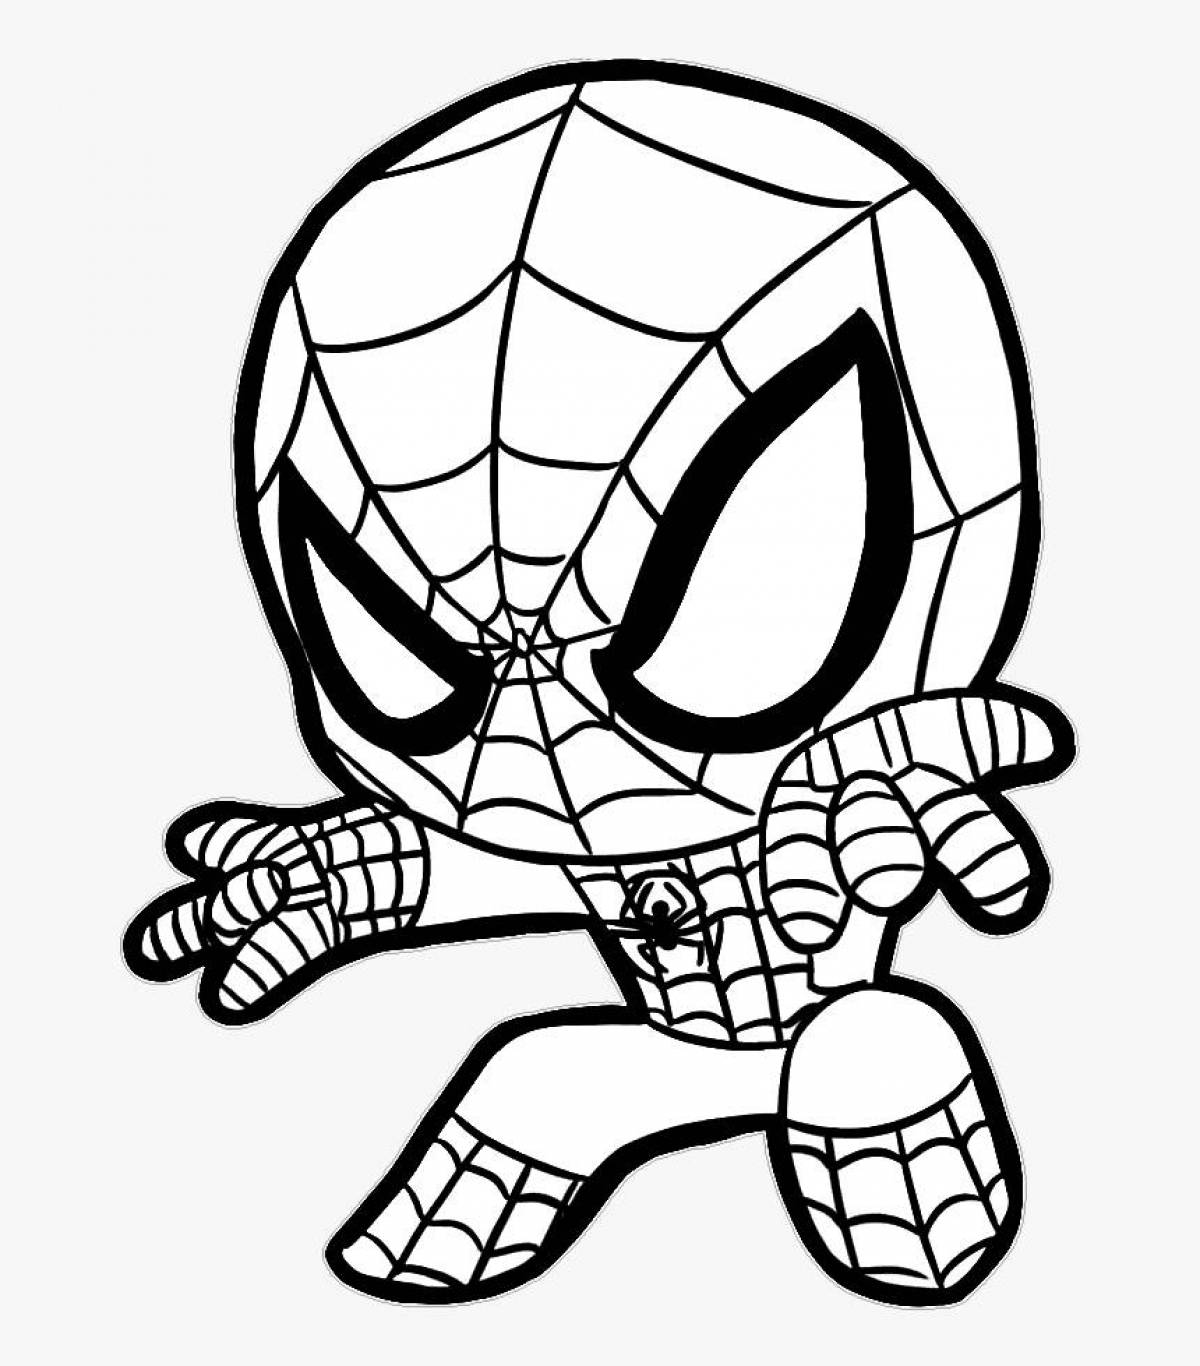 Glorious Spiderman coloring pages for kids